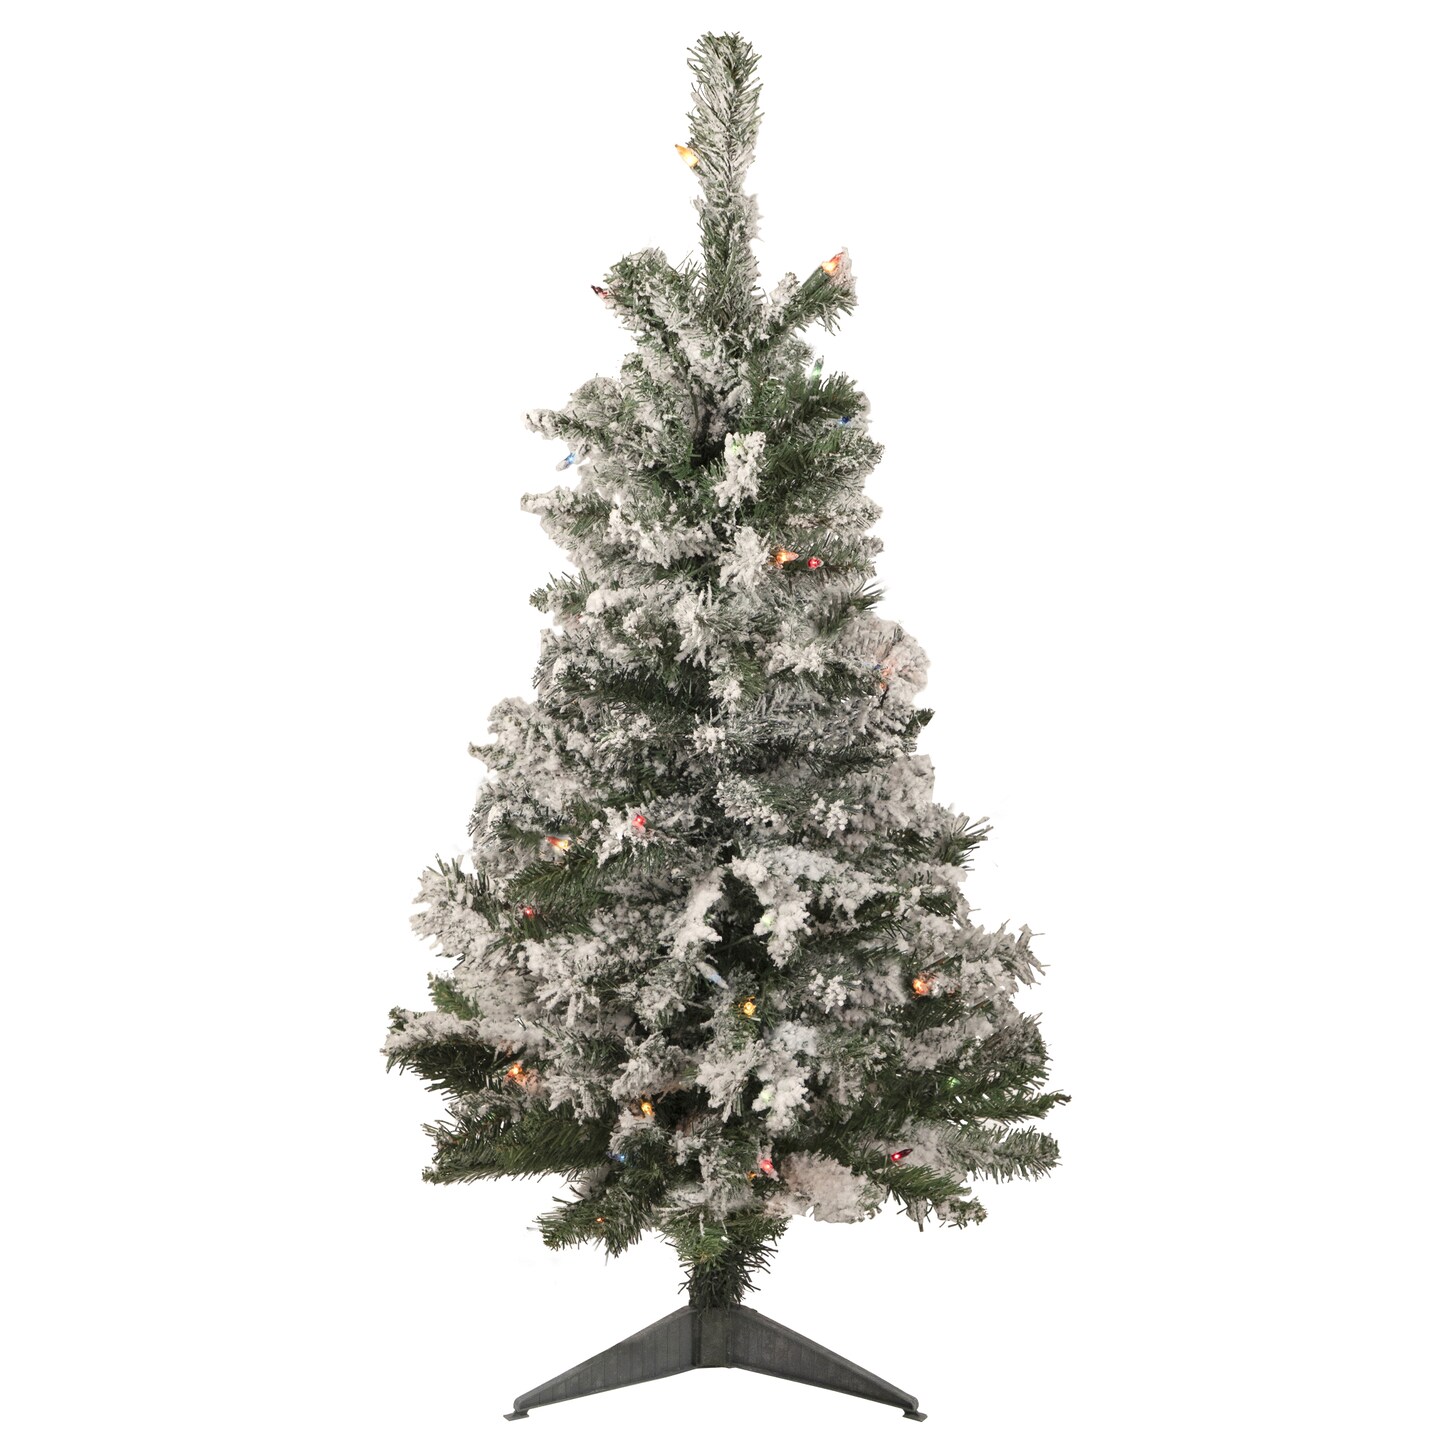 Artificial Frosted Christmas Tree - Medium